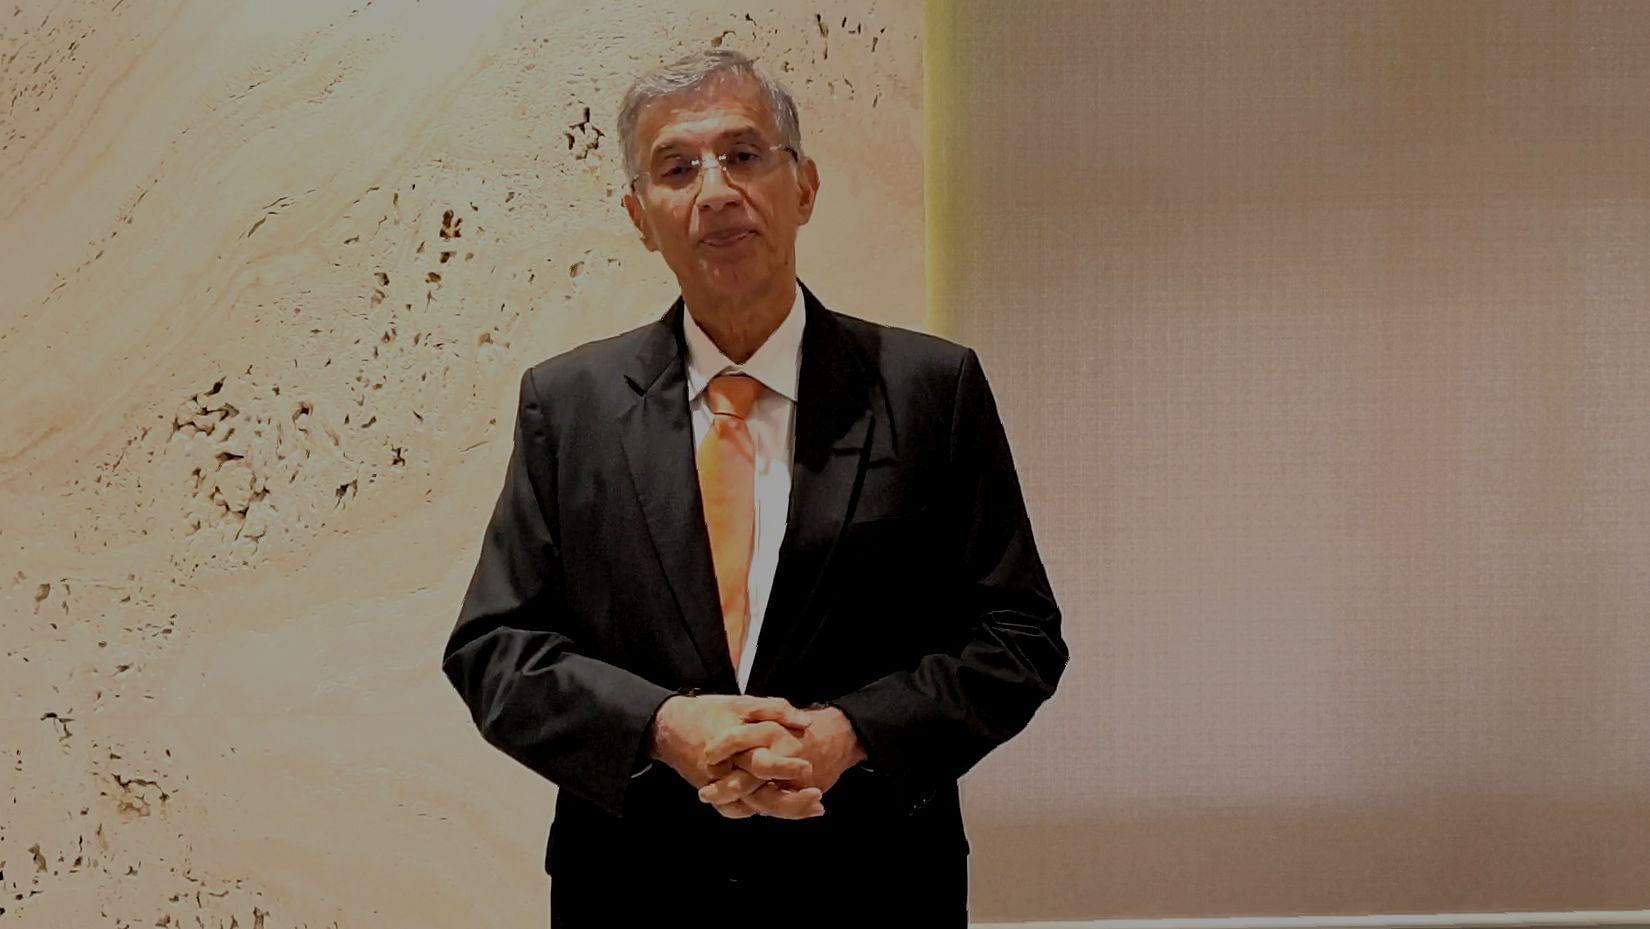 Before Nirmala Sitharaman’s maiden Budget, real estate developer Niranjan Hiranandani explains the problems causing the slowdown in the housing sector and the economy in general.